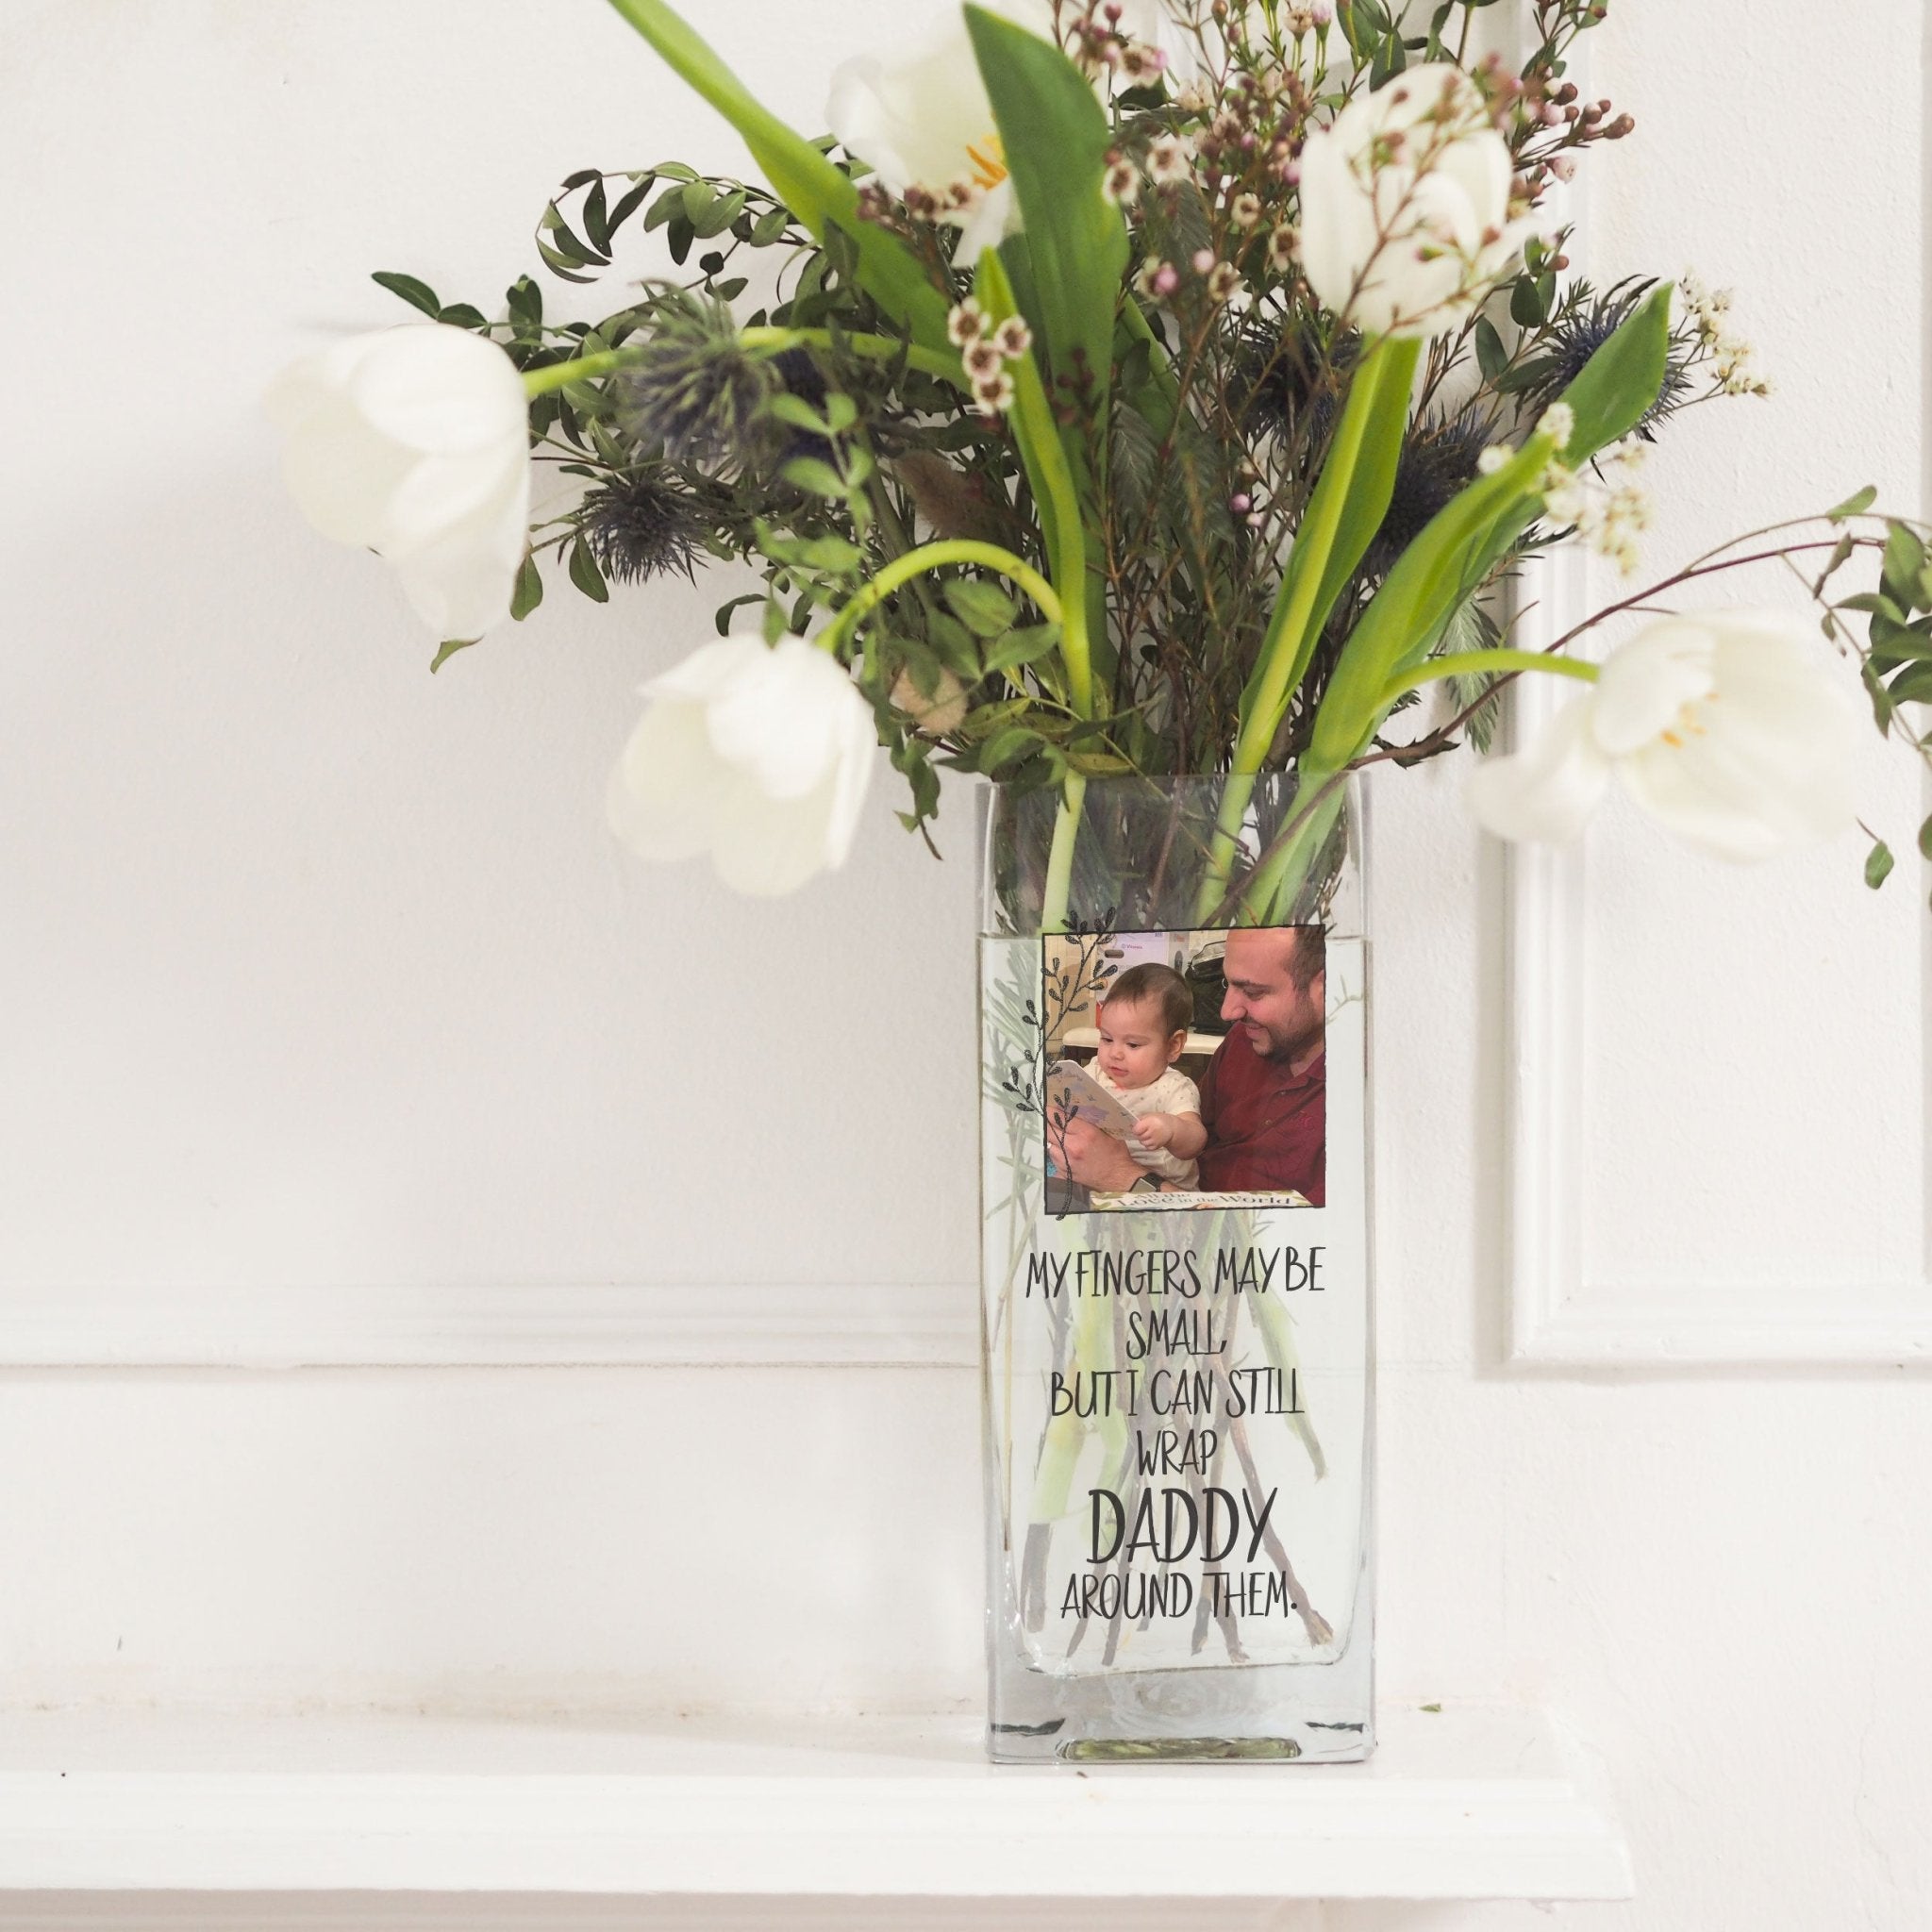 New Dad Custom Photo Glass Vase | First Fathers Day Gift Ideas | Personalised Flower Stand with Picture | Acrylic Crystal Home Decor Present Vase - Unique Prints